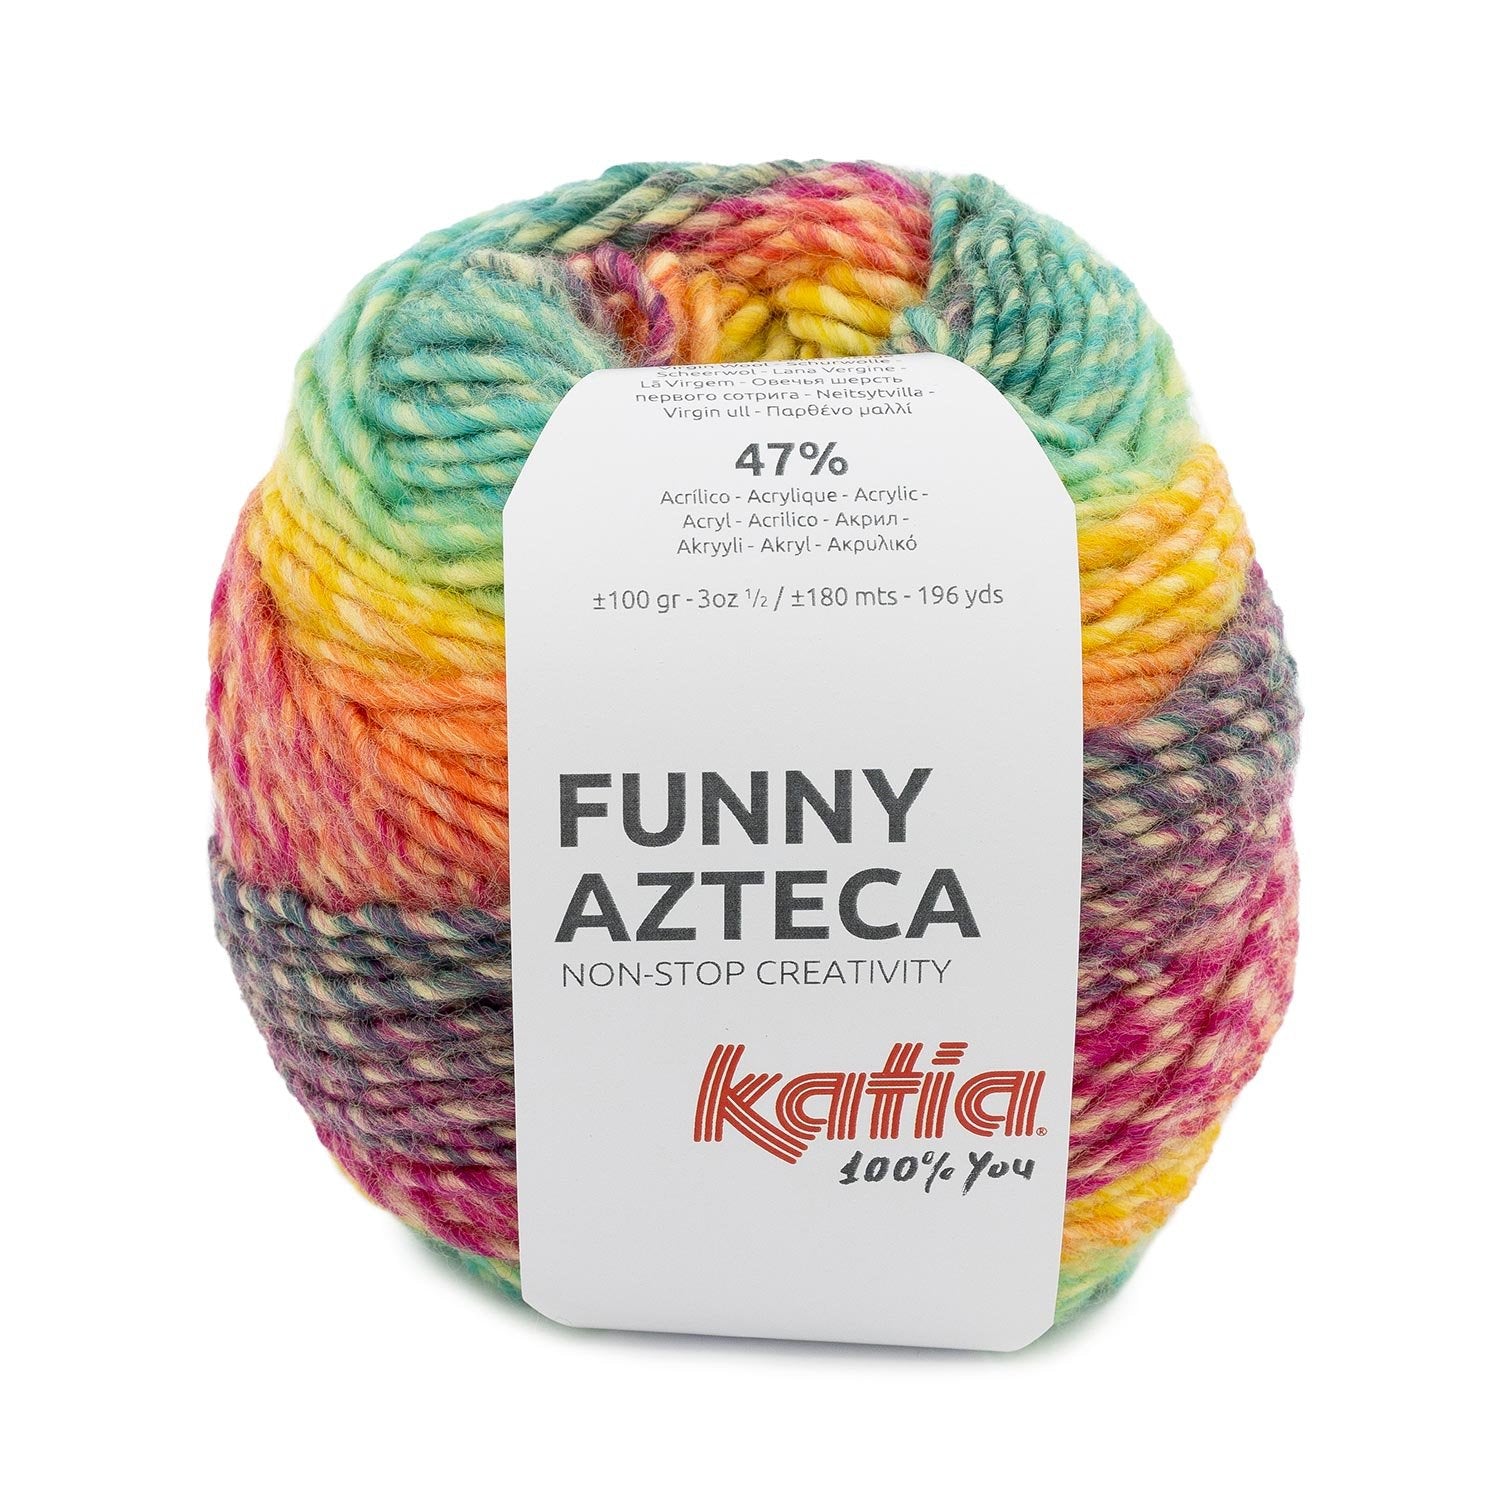 Katia Funny Azteca: Creativity and happy colors in your projects